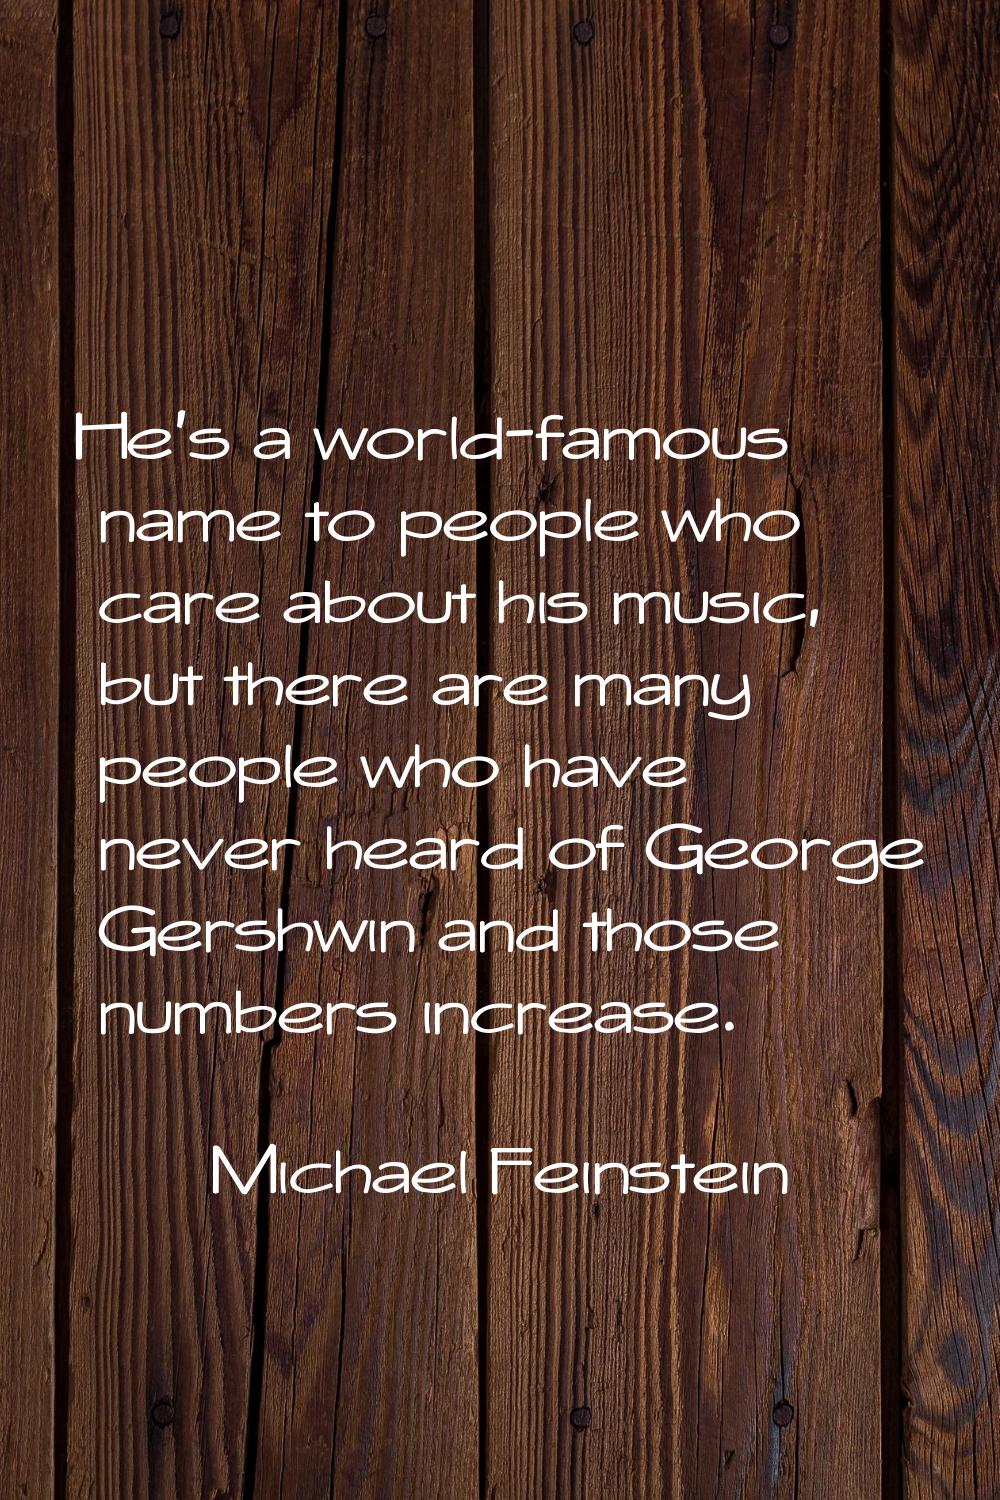 He's a world-famous name to people who care about his music, but there are many people who have nev